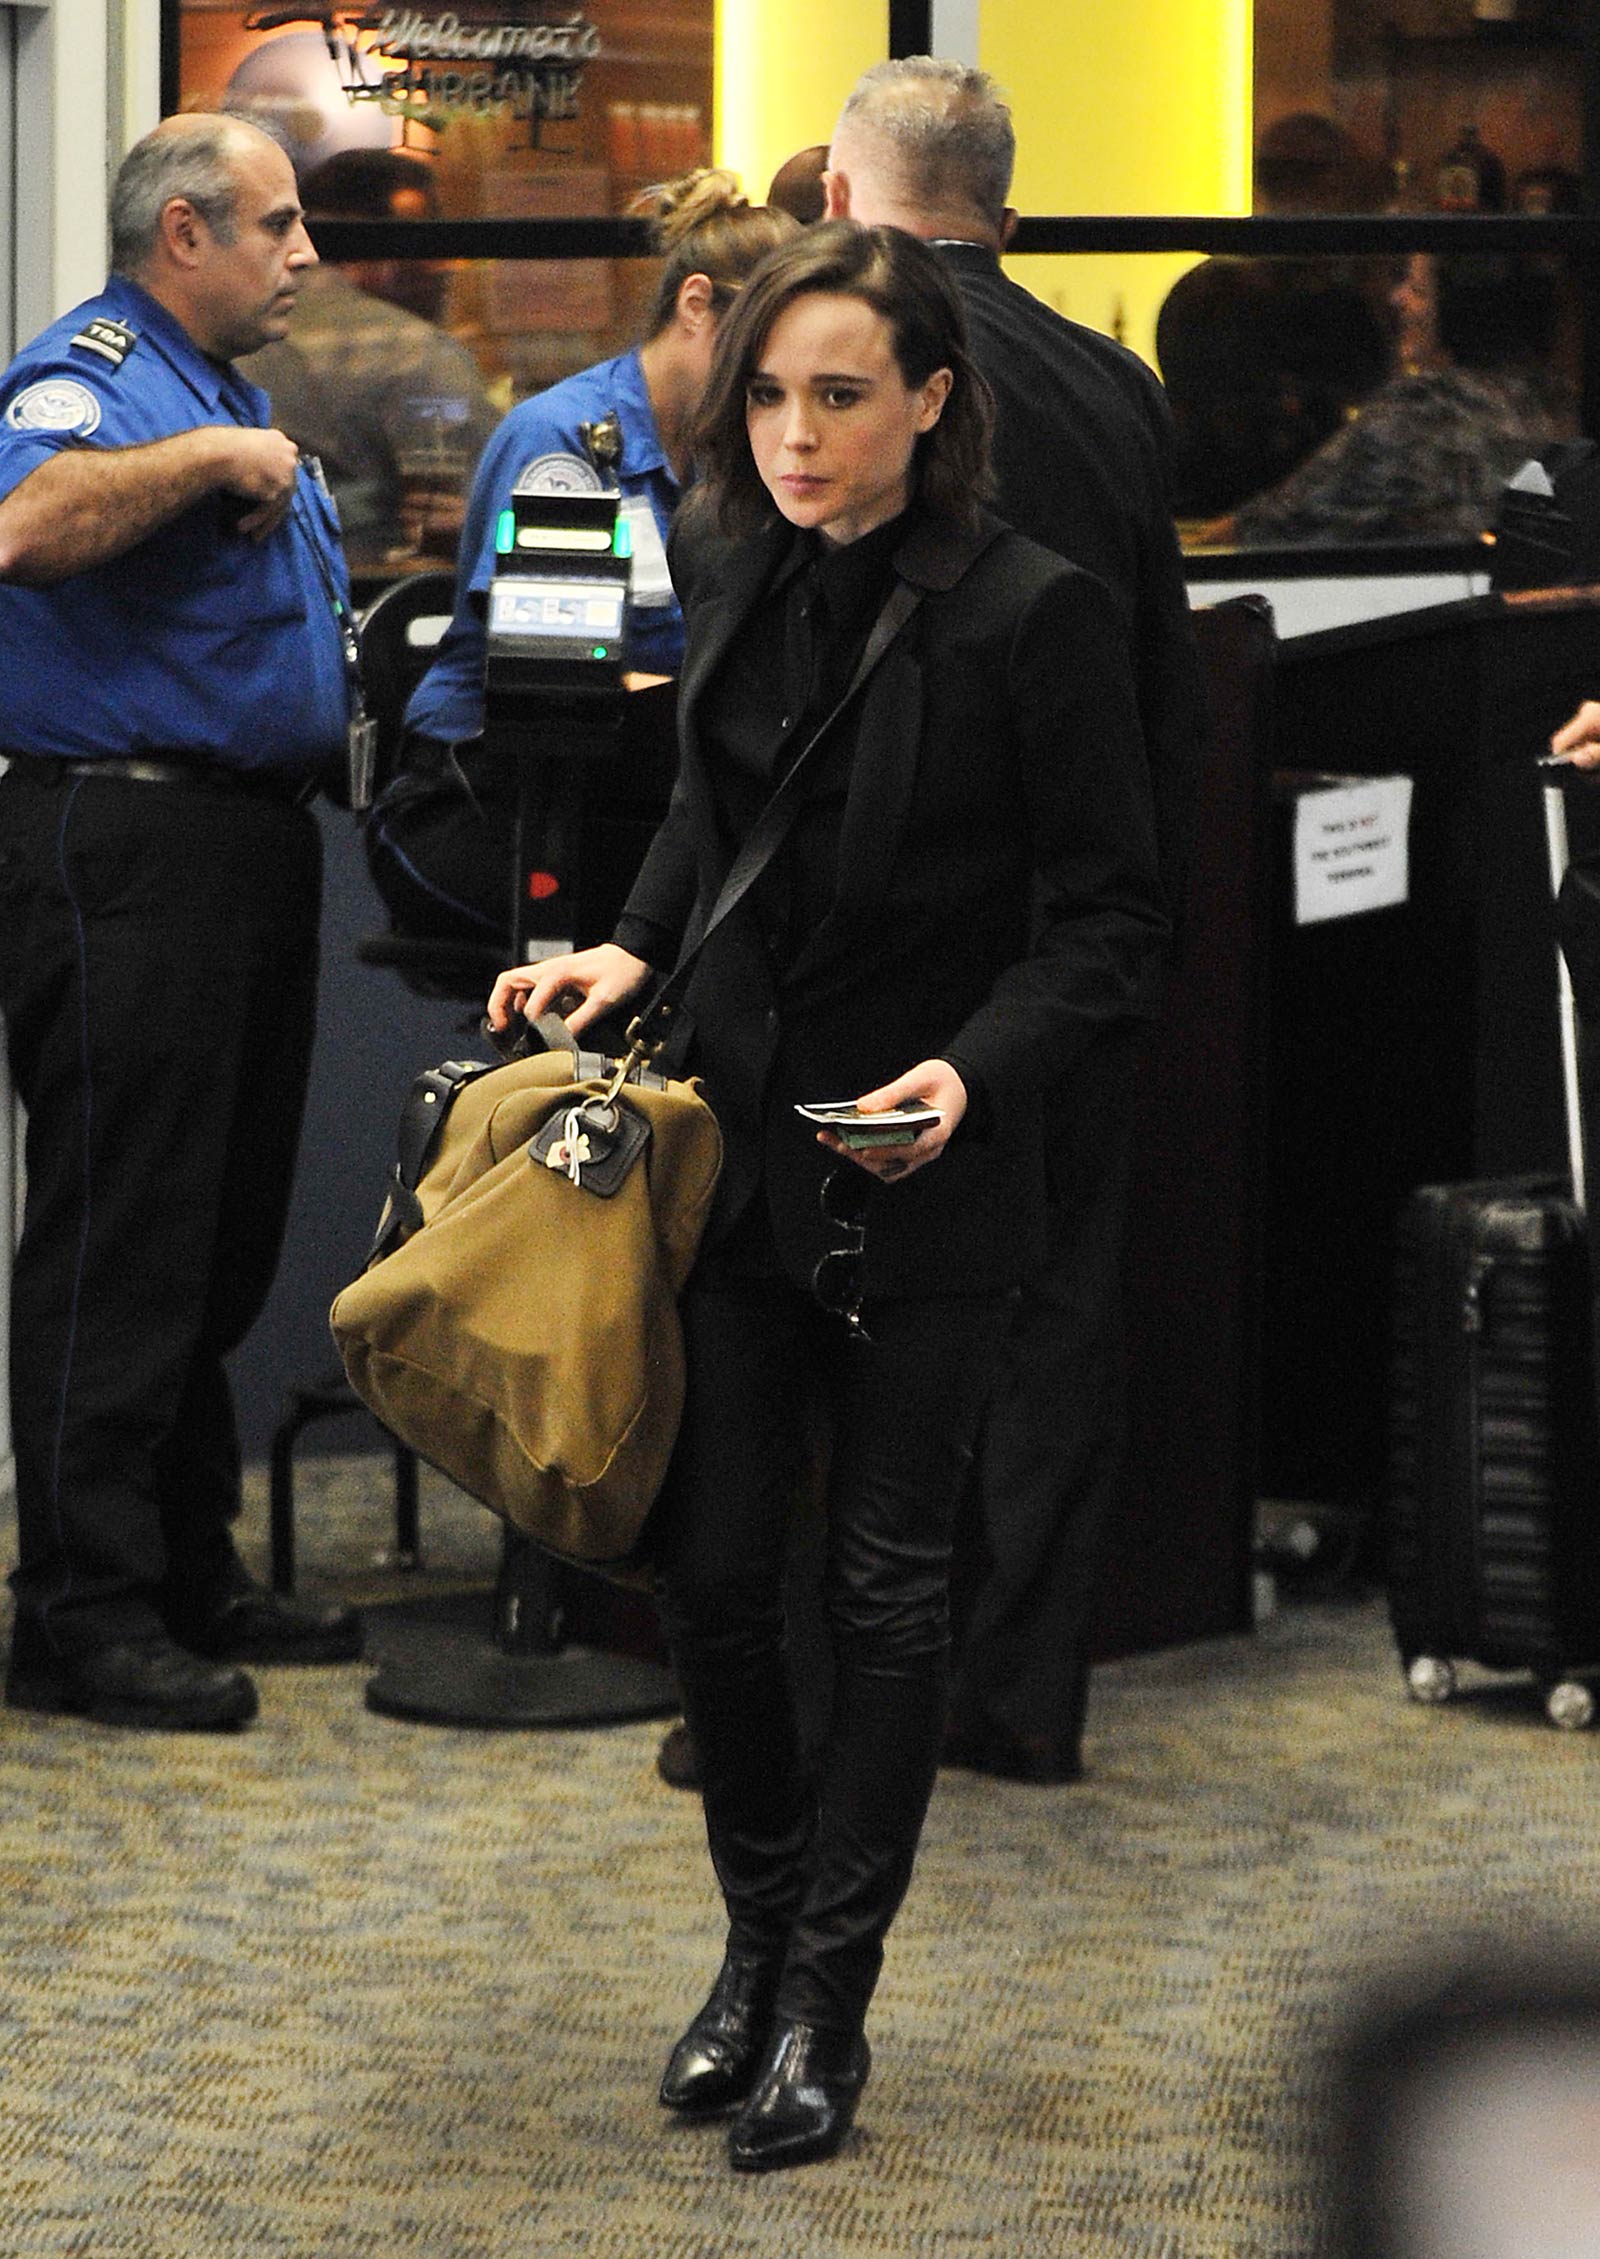 Ellen Page catching a flight to San Francisco